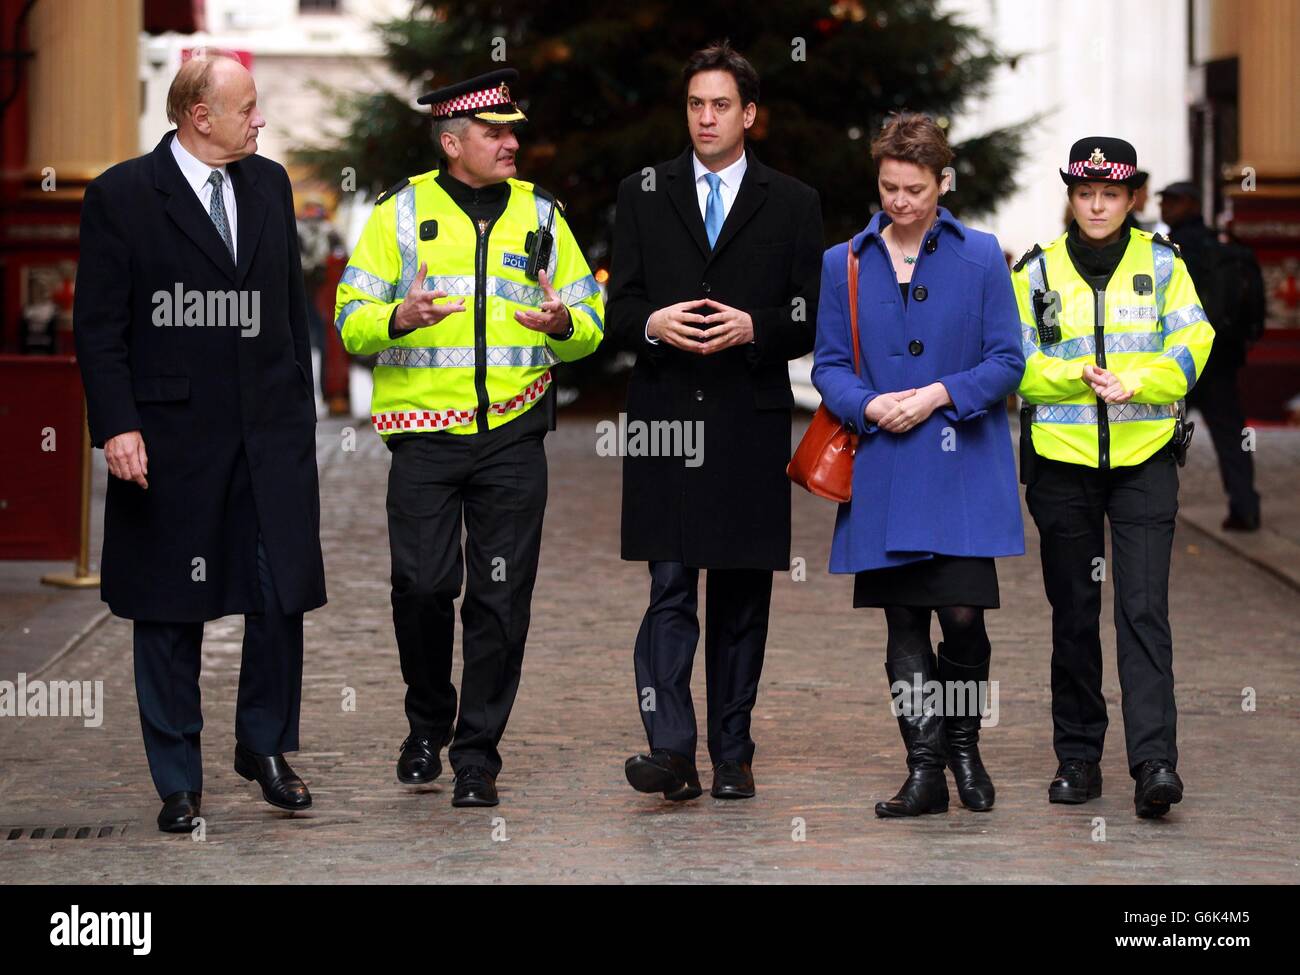 Previously unissued photo dated 22/11/13 of (left to right) Lord Stevens, Superintendent David Laws, Labour Leader Ed Miliband, Shadow home secretary Yvette Cooper and Inspector Claire Burgess meeting in the City of London to discuss neighbourhood policing. Stock Photo